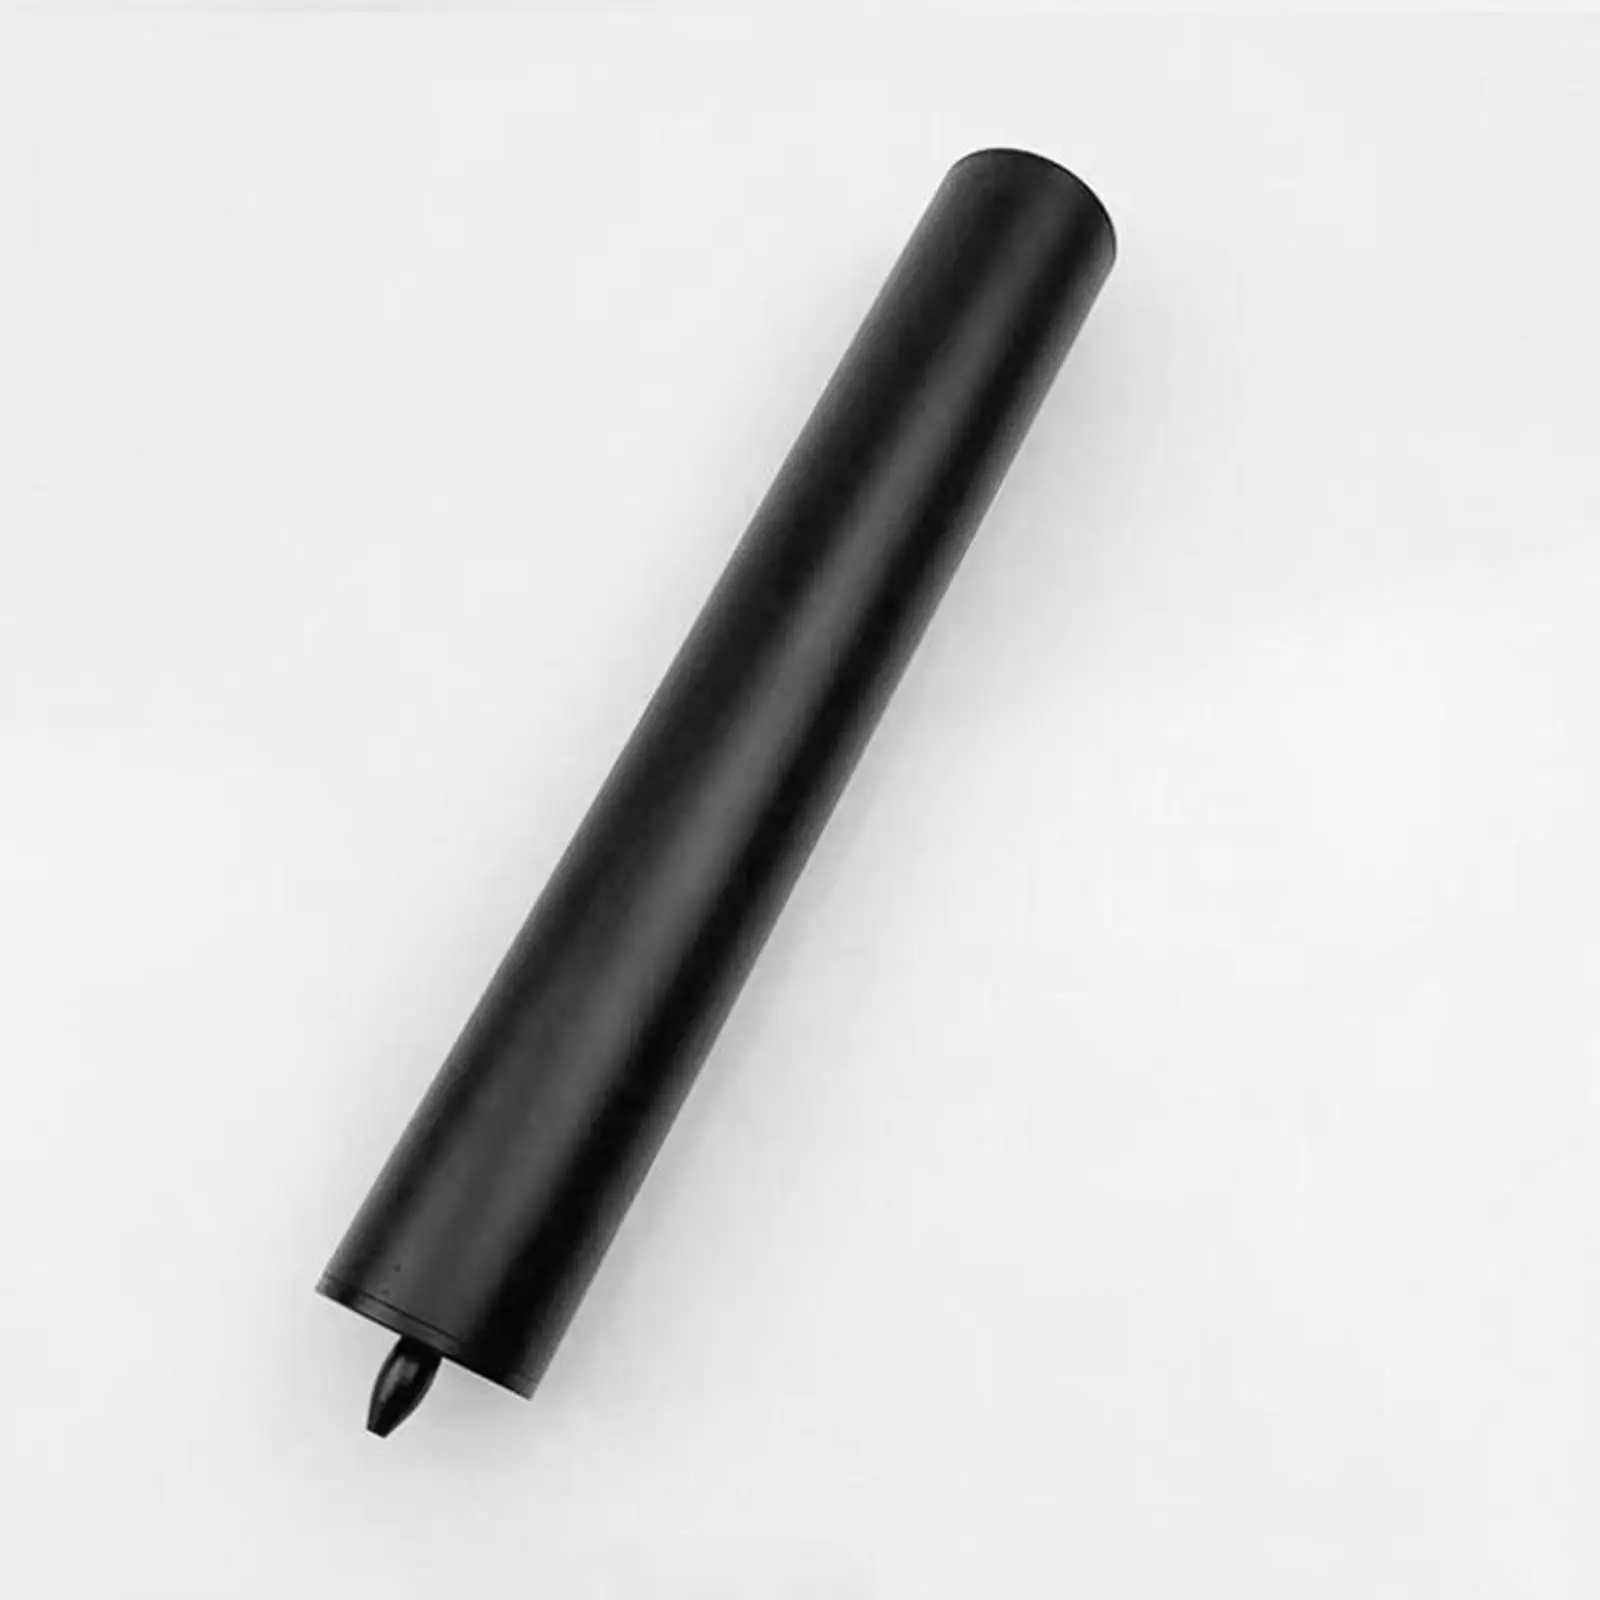 Pool Cue Extender Billiard Cue Extension Ultralight Portable Professional Billiards Snooker Cue Extension for Snooker Athlete